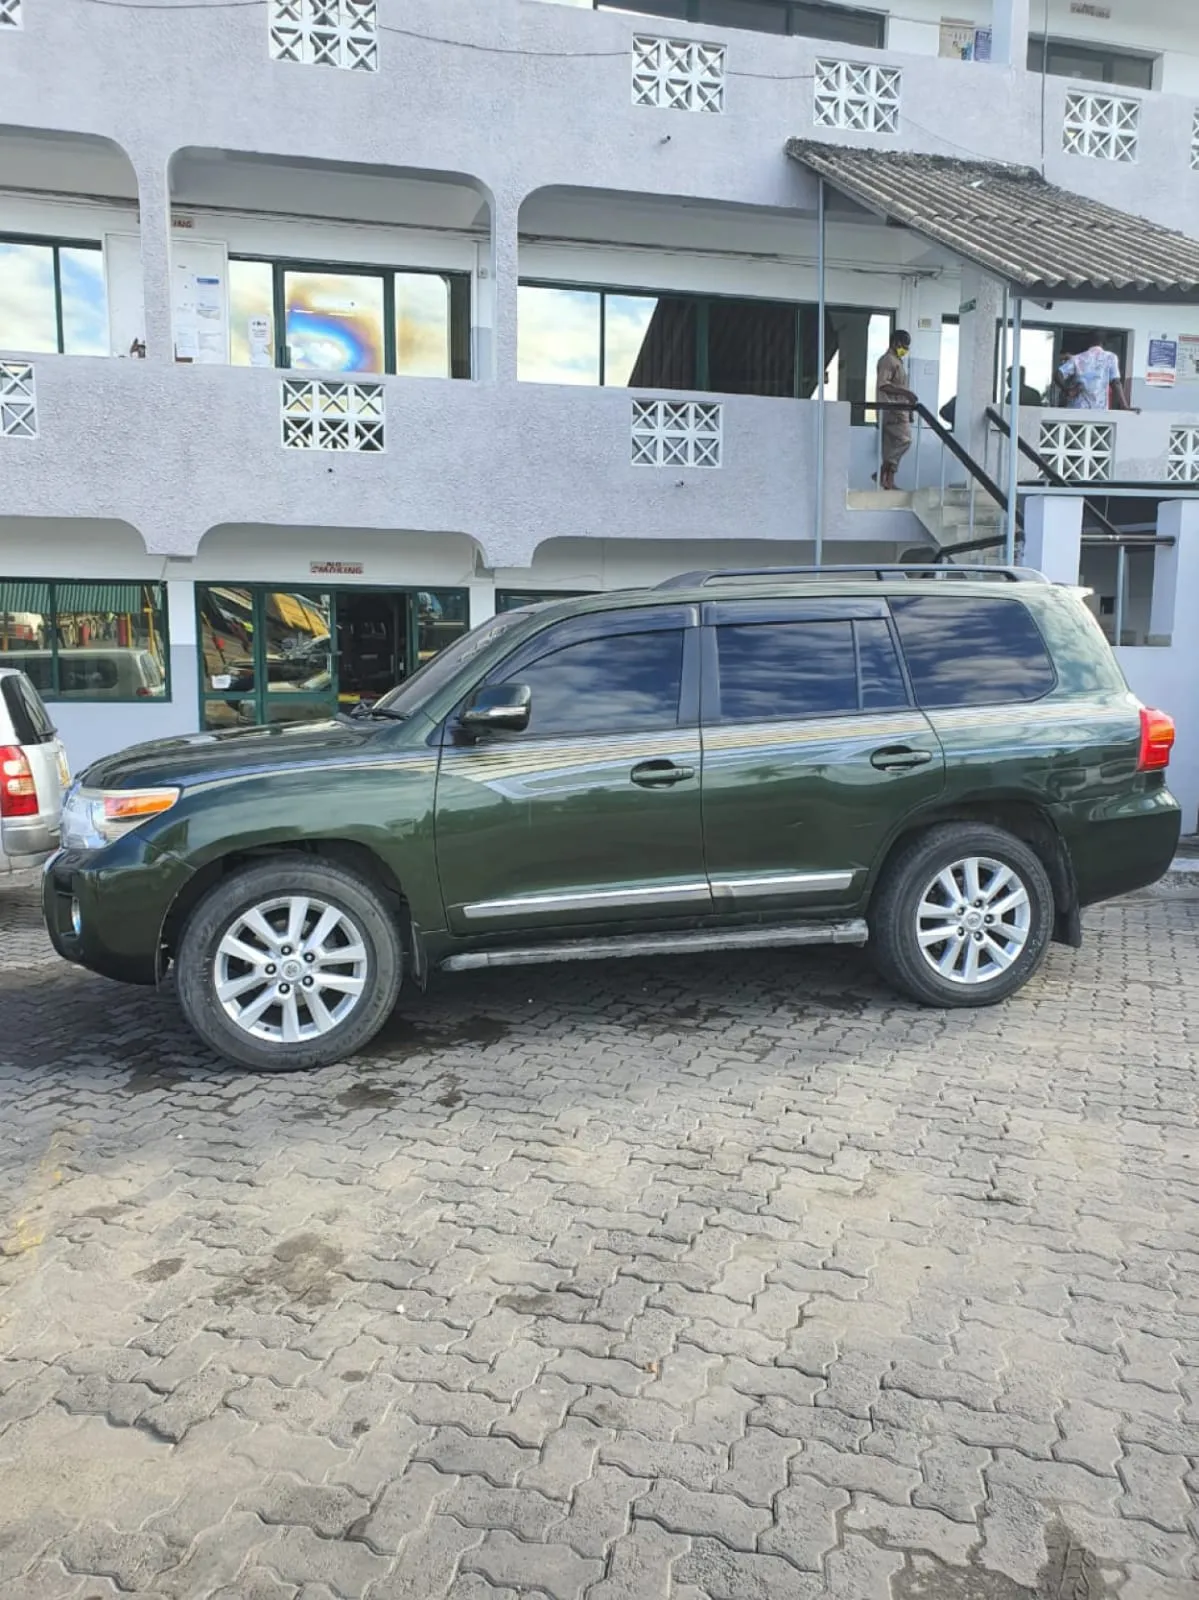 Cars Cars For Sale/Vehicles SUV-Locally assembled Toyota Landcruiser V8 Diesel As New On offer 2013 11